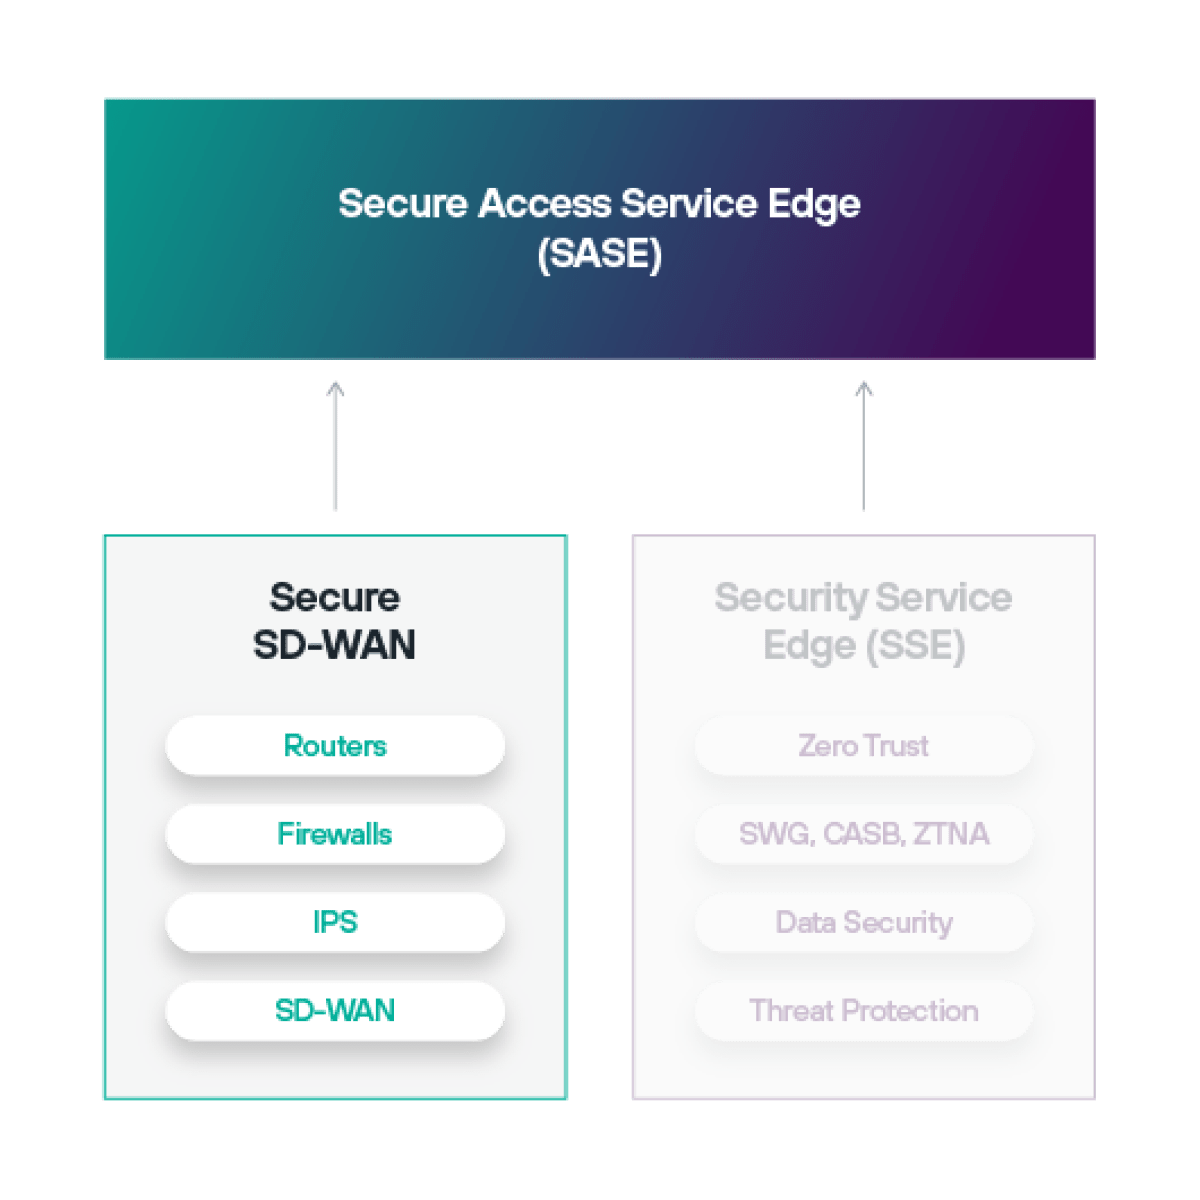 Software-Defined Wide Area Networking (SD-WAN) は、Secure Access Service Edge (SASE) アーキテクチャの一部です。